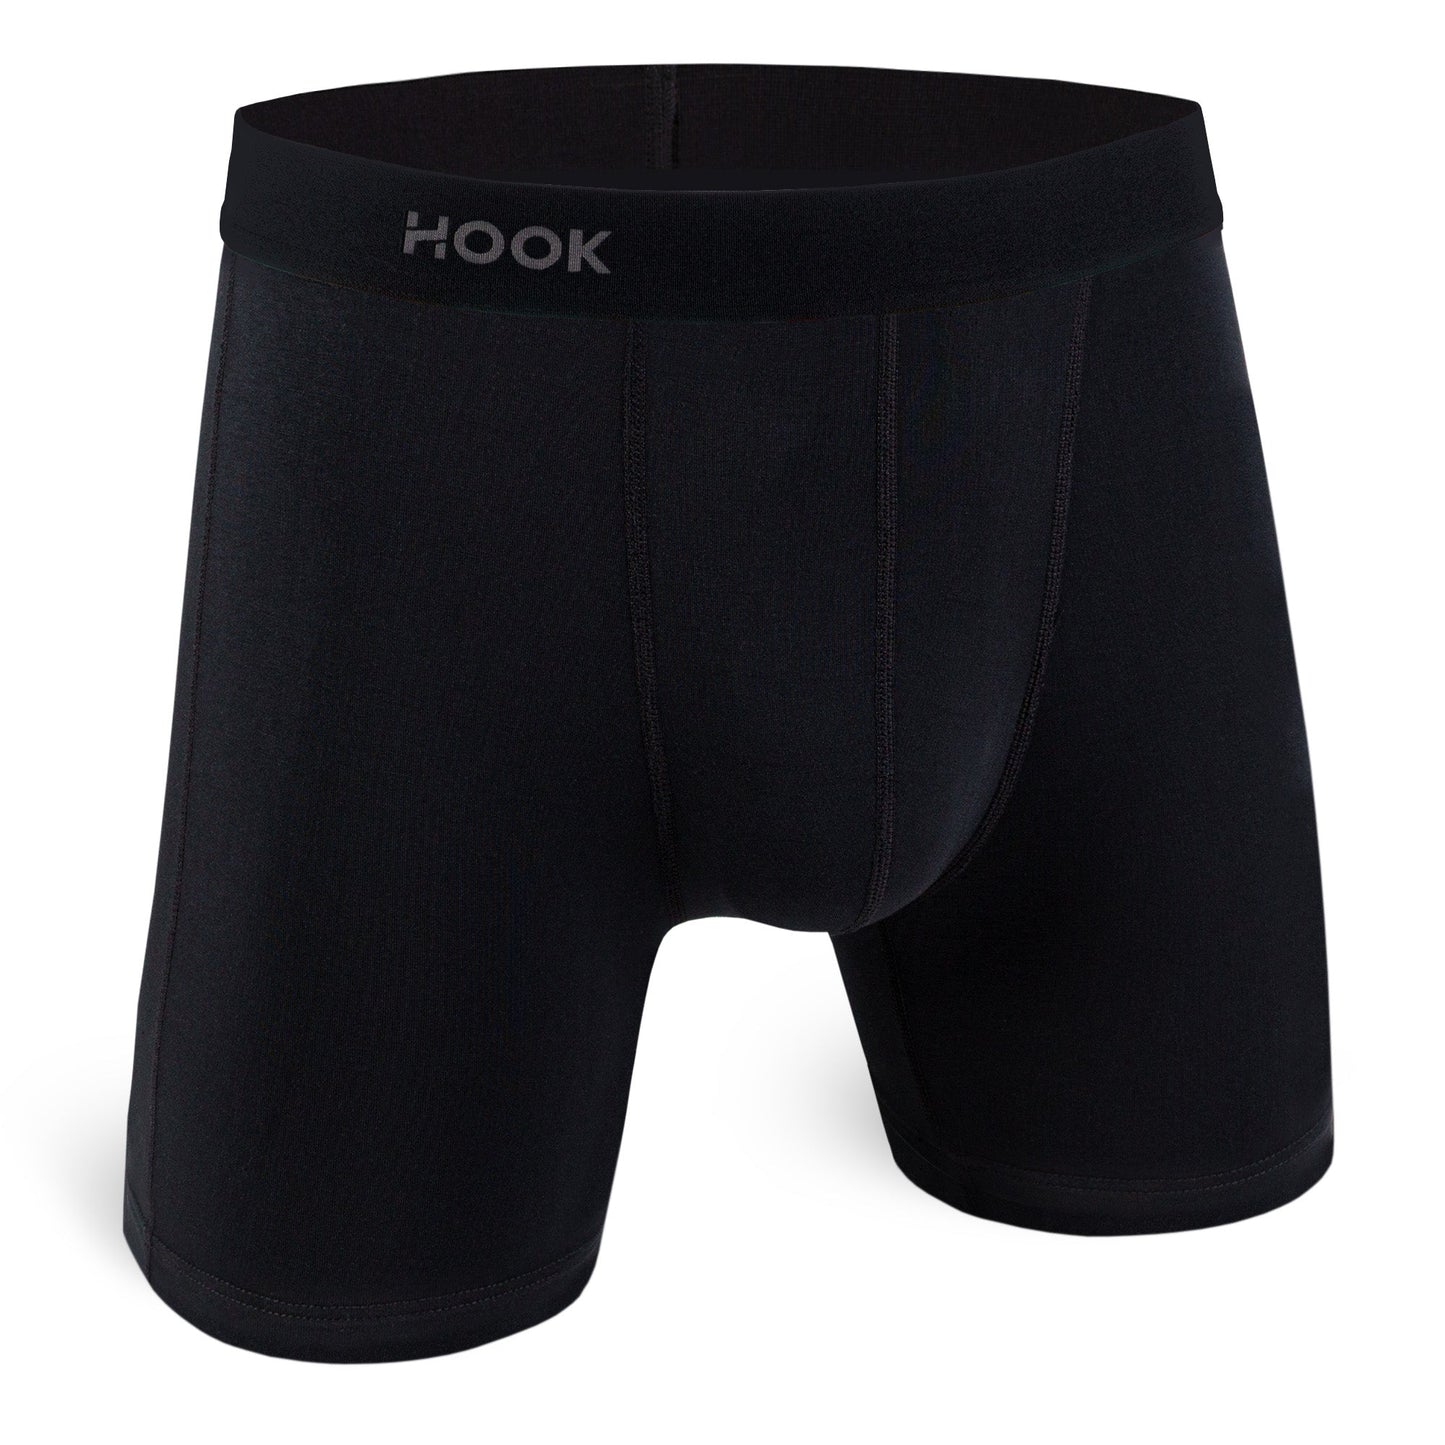 Hook - Le pack Confo+